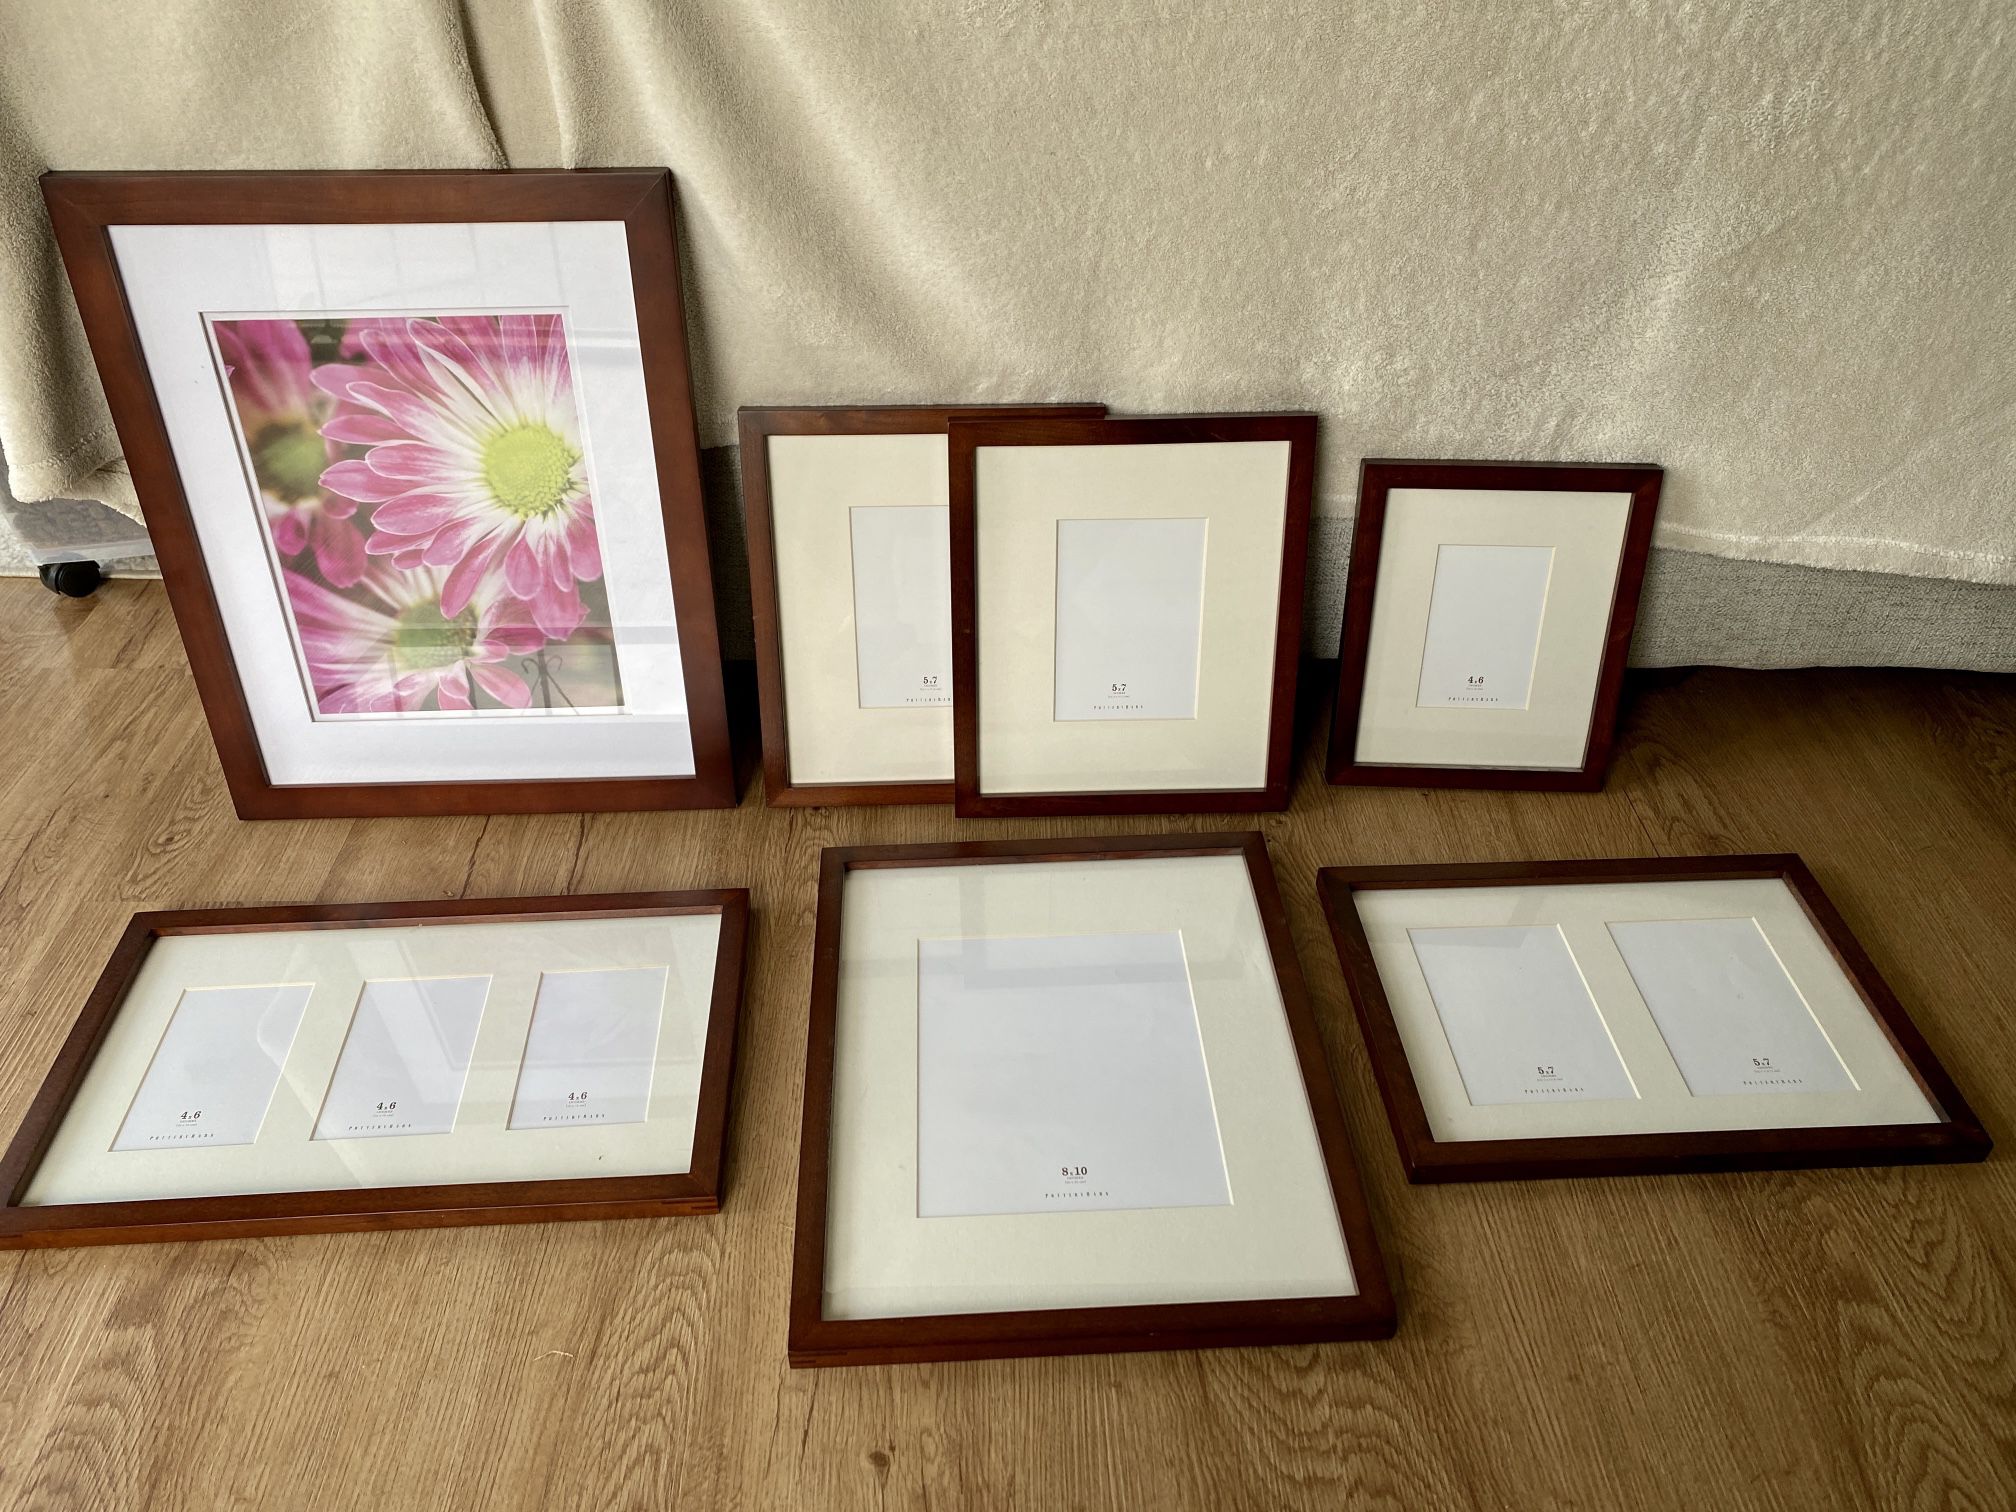 PICTURE PHOTO FRAMES WOOD Luxury Sheffield Pottery Barn 8x10 4x6